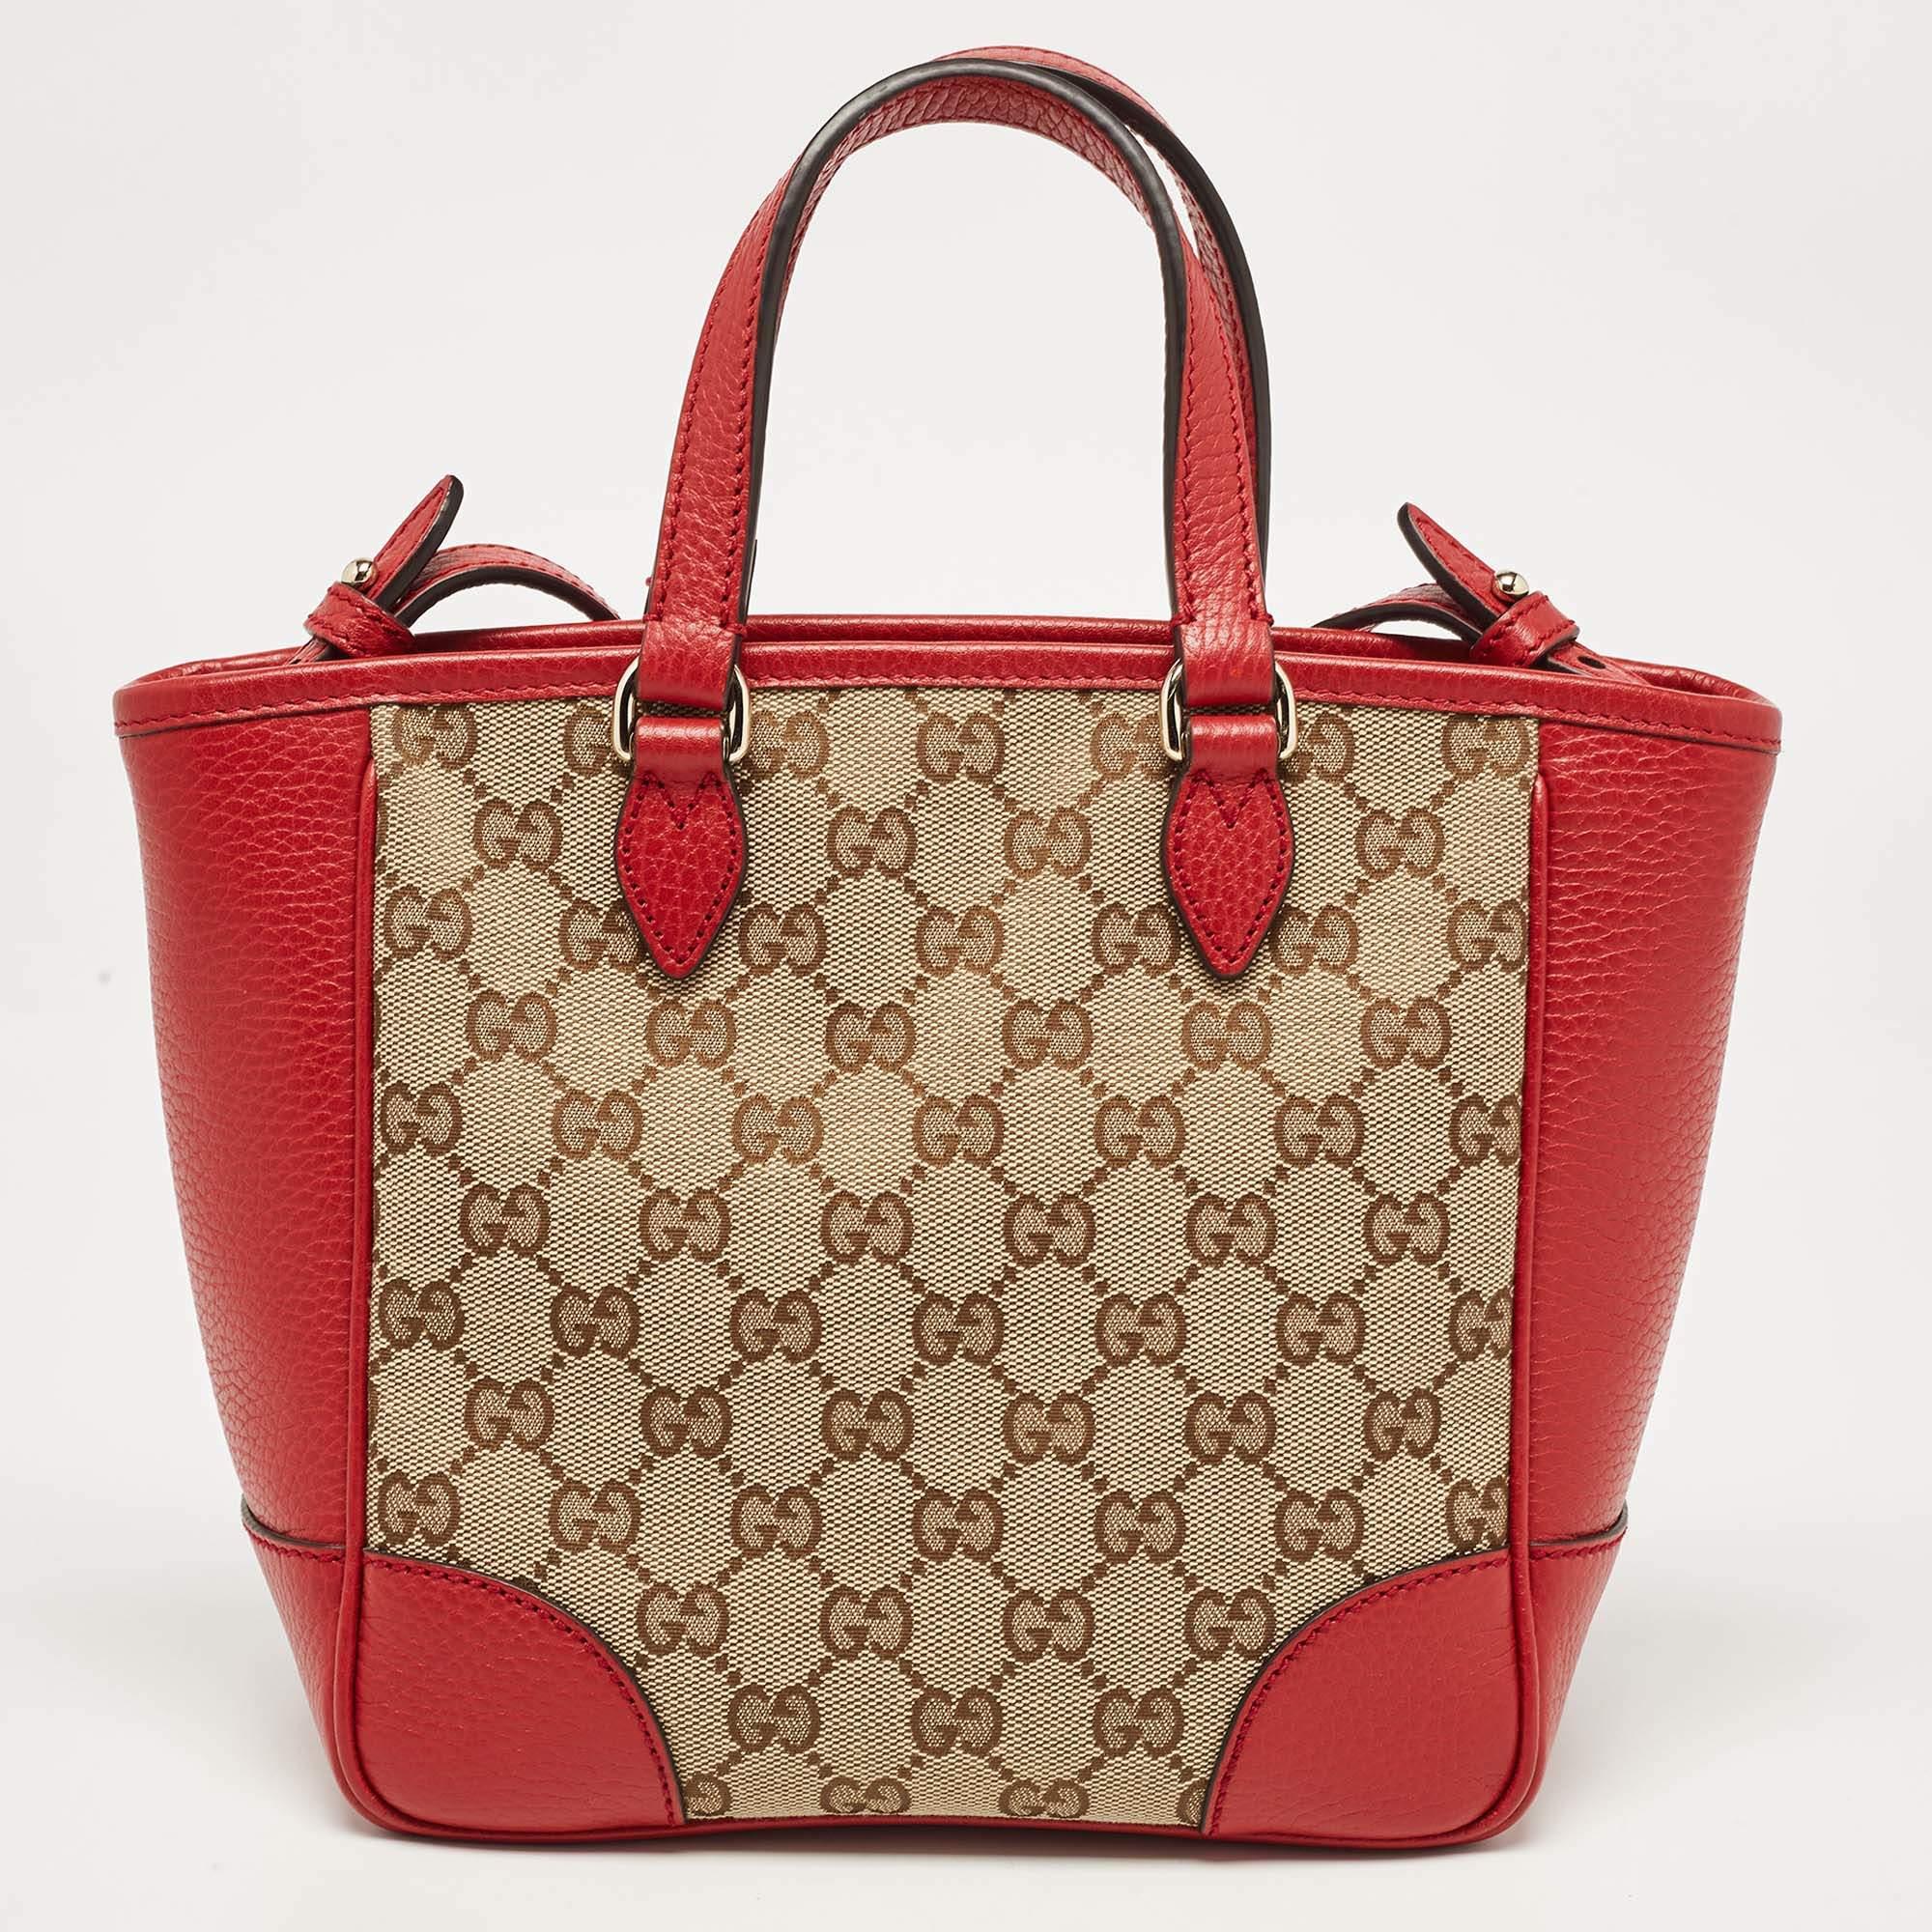 Designed to deliver style and functionality, this tote bag by Gucci has been crafted from GG canvas and leather. It features dual handles, a spacious interior, and gold-tone hardware. It is great for everyday use.

Includes: Original Dustbag,